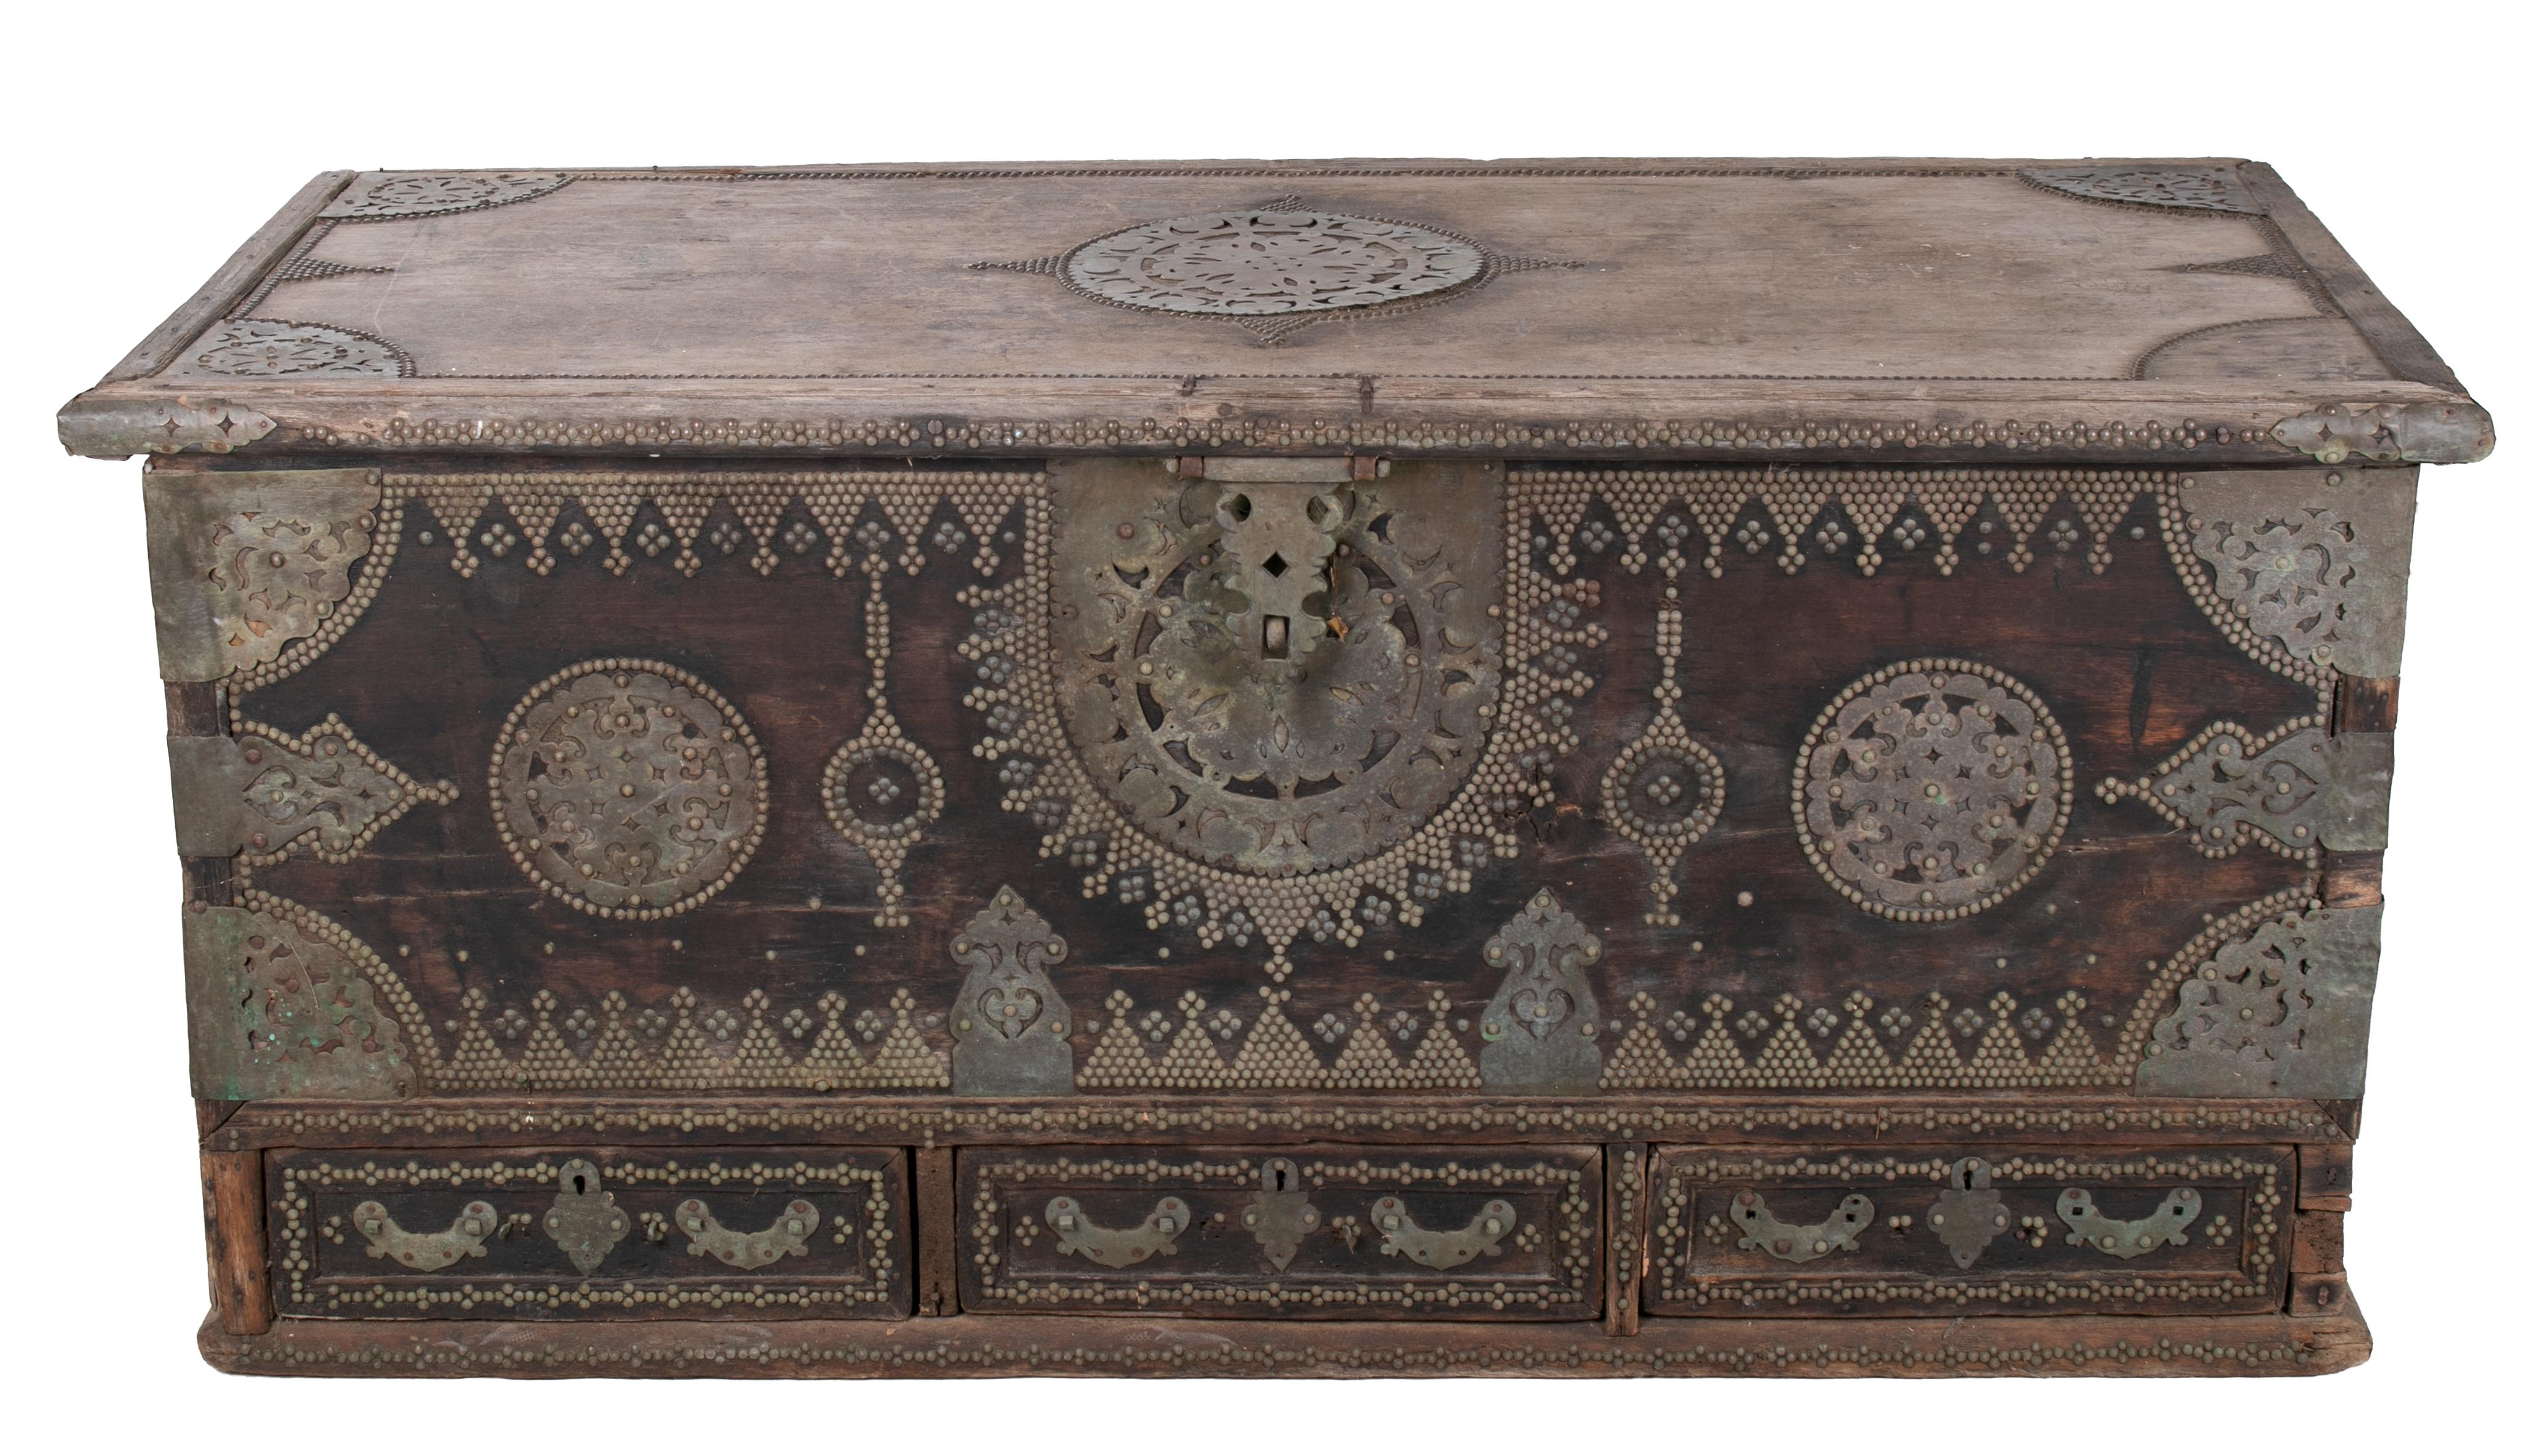 19th century Turkish wooden trunk with bronze decorations and fittings.